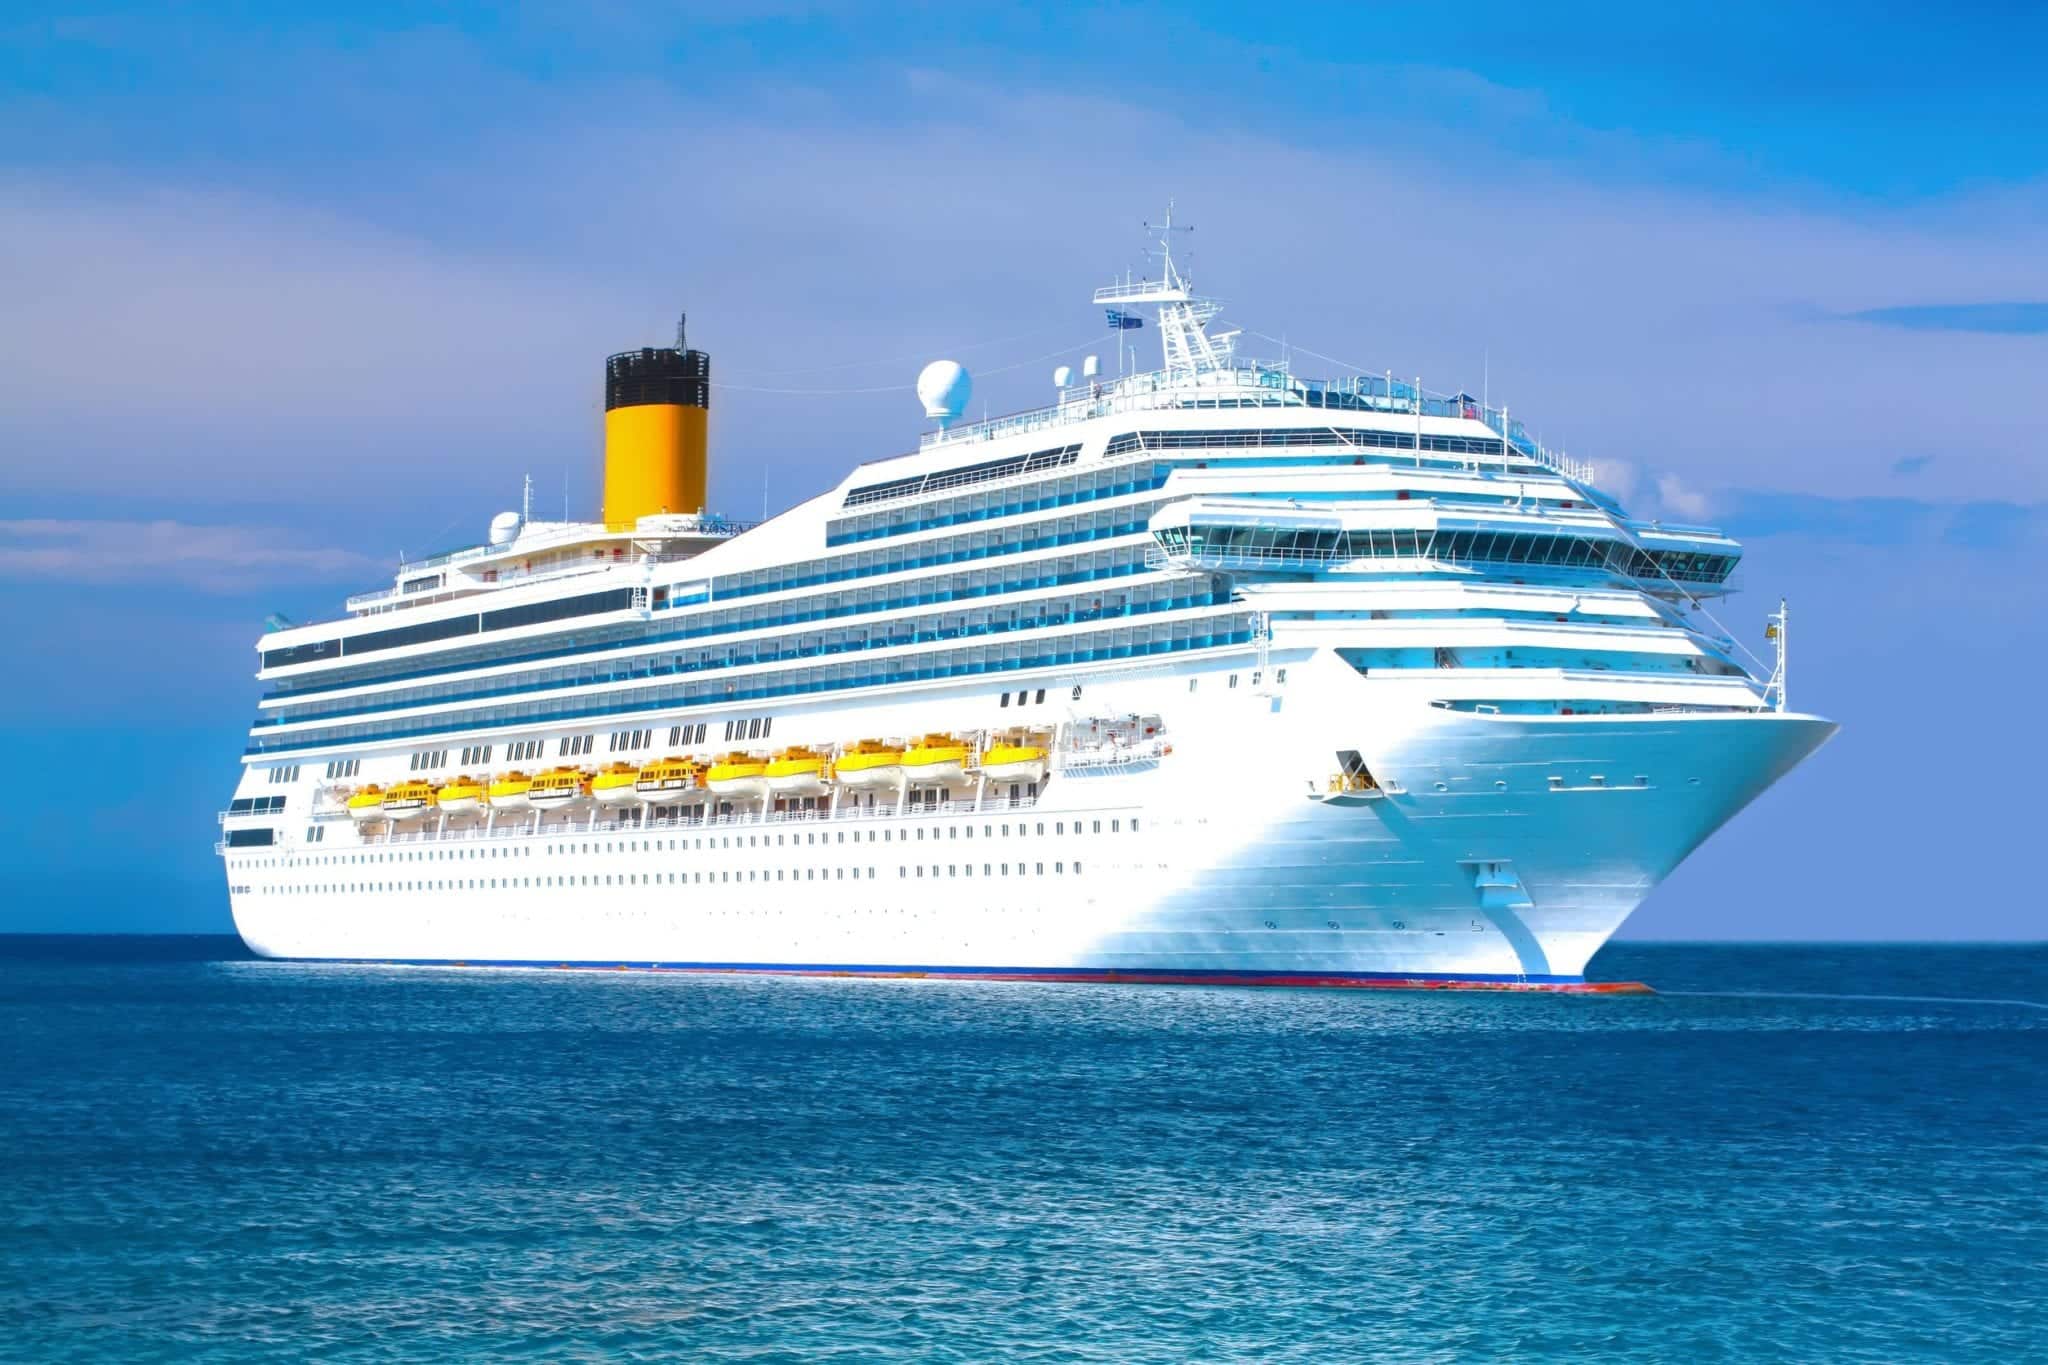 When a Cruise Employee Injury is Due to the Cruise Line’s Negligence